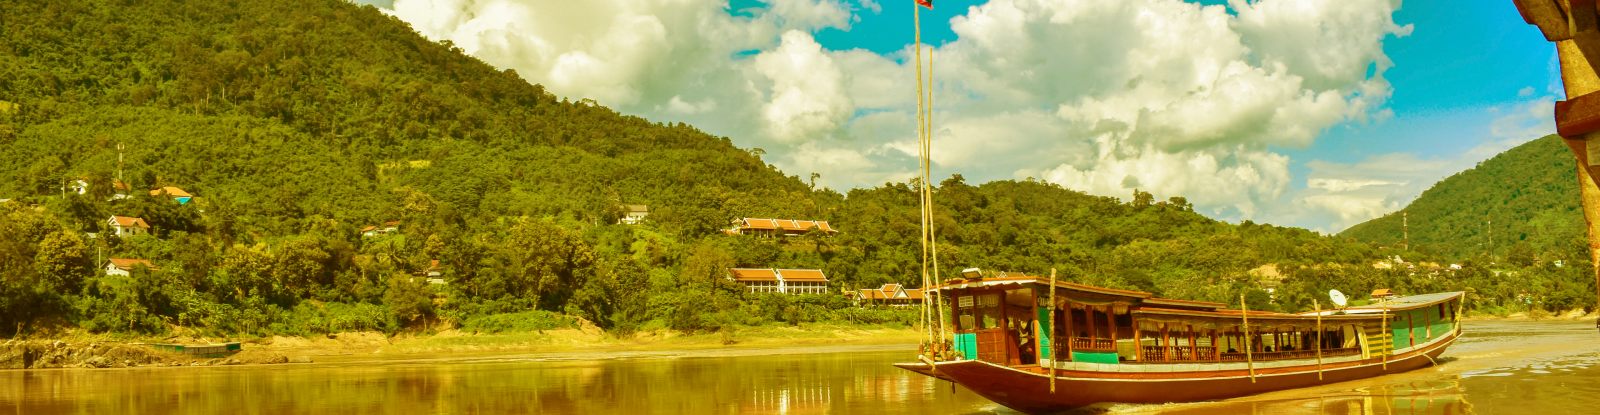 Traditional Le Grand Cruise on Mekong River